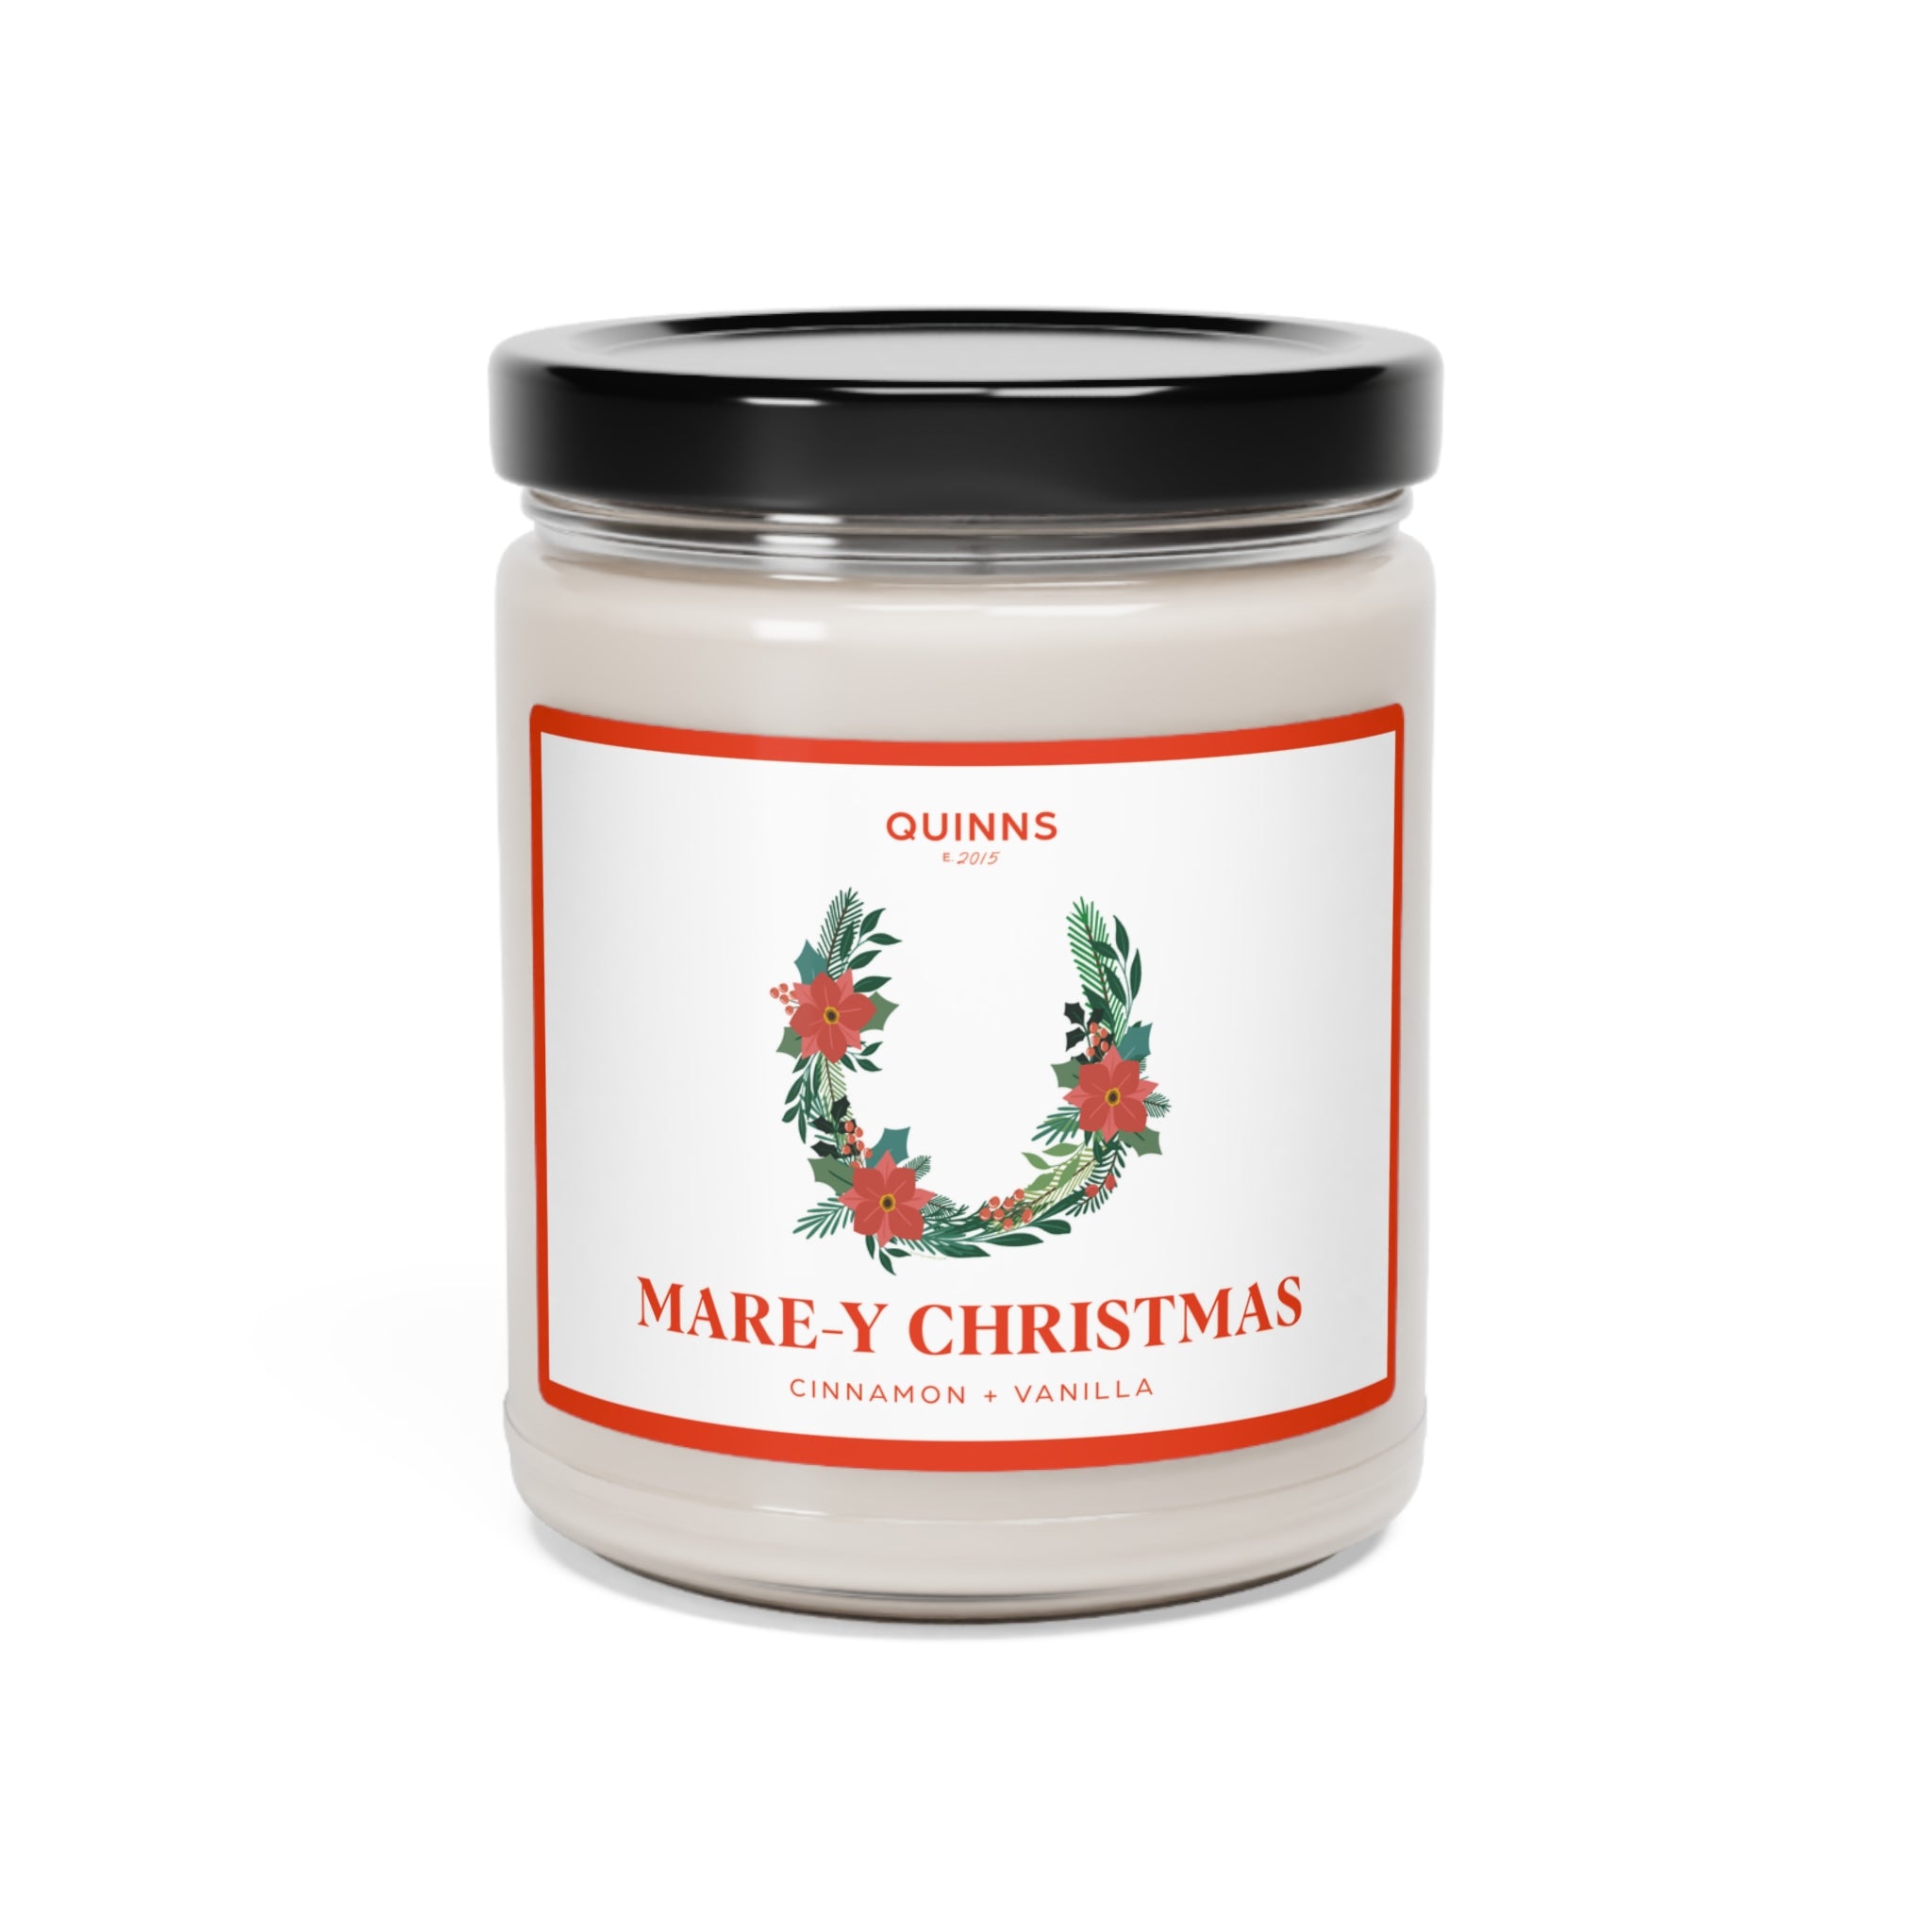 Mare-y Christmas Candle